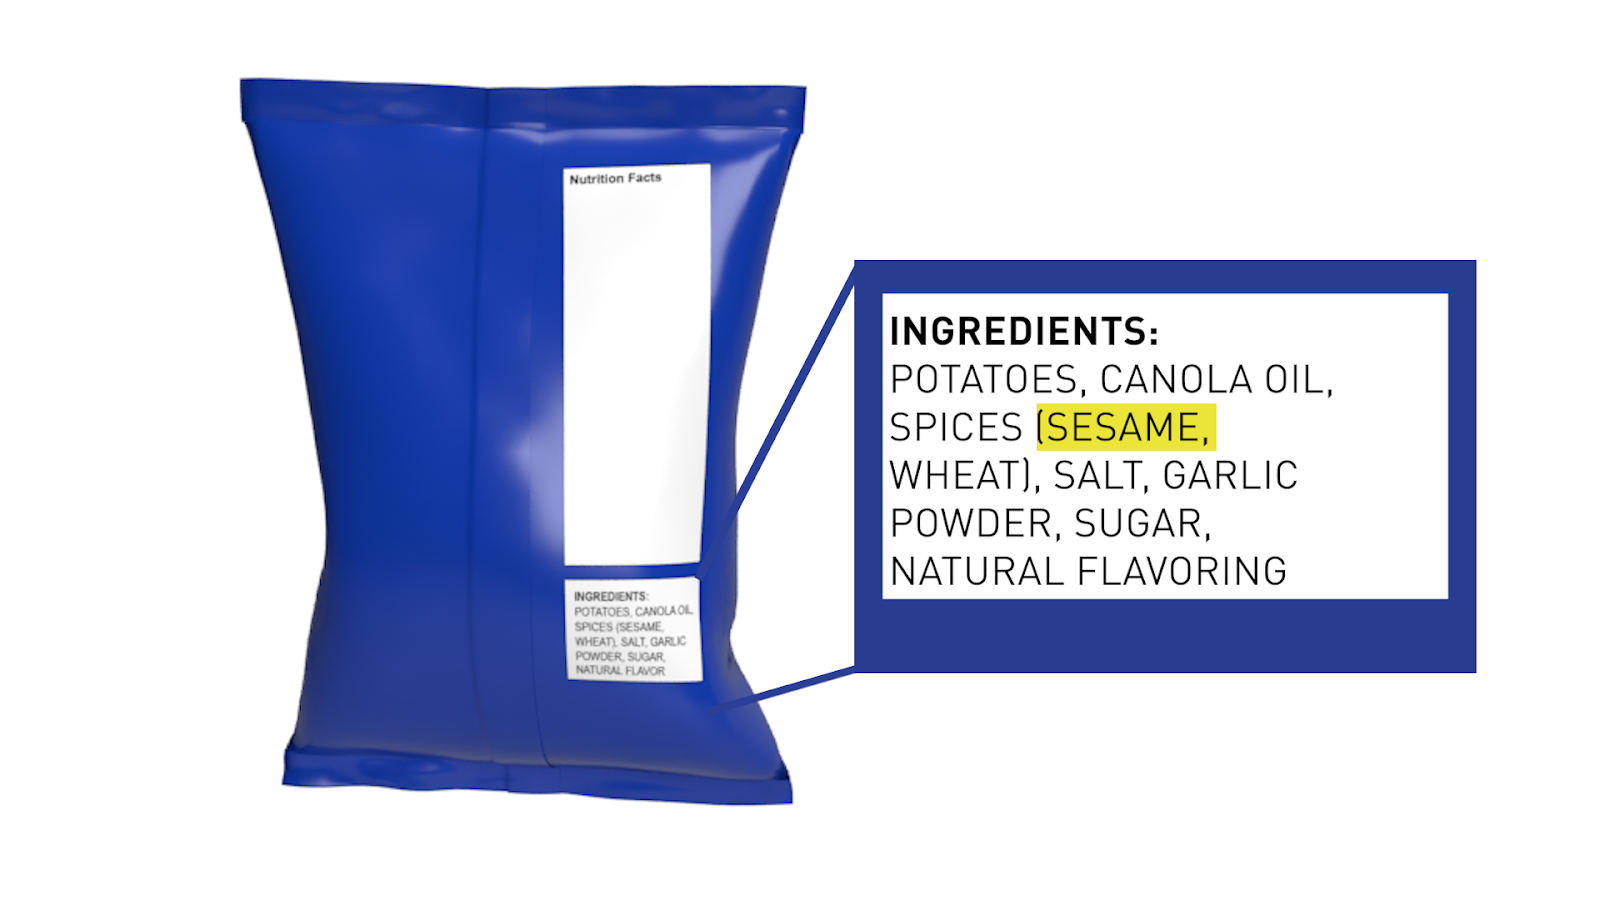 Graphic showing a blue food packet pointing to a block listing ingredients in the package itself